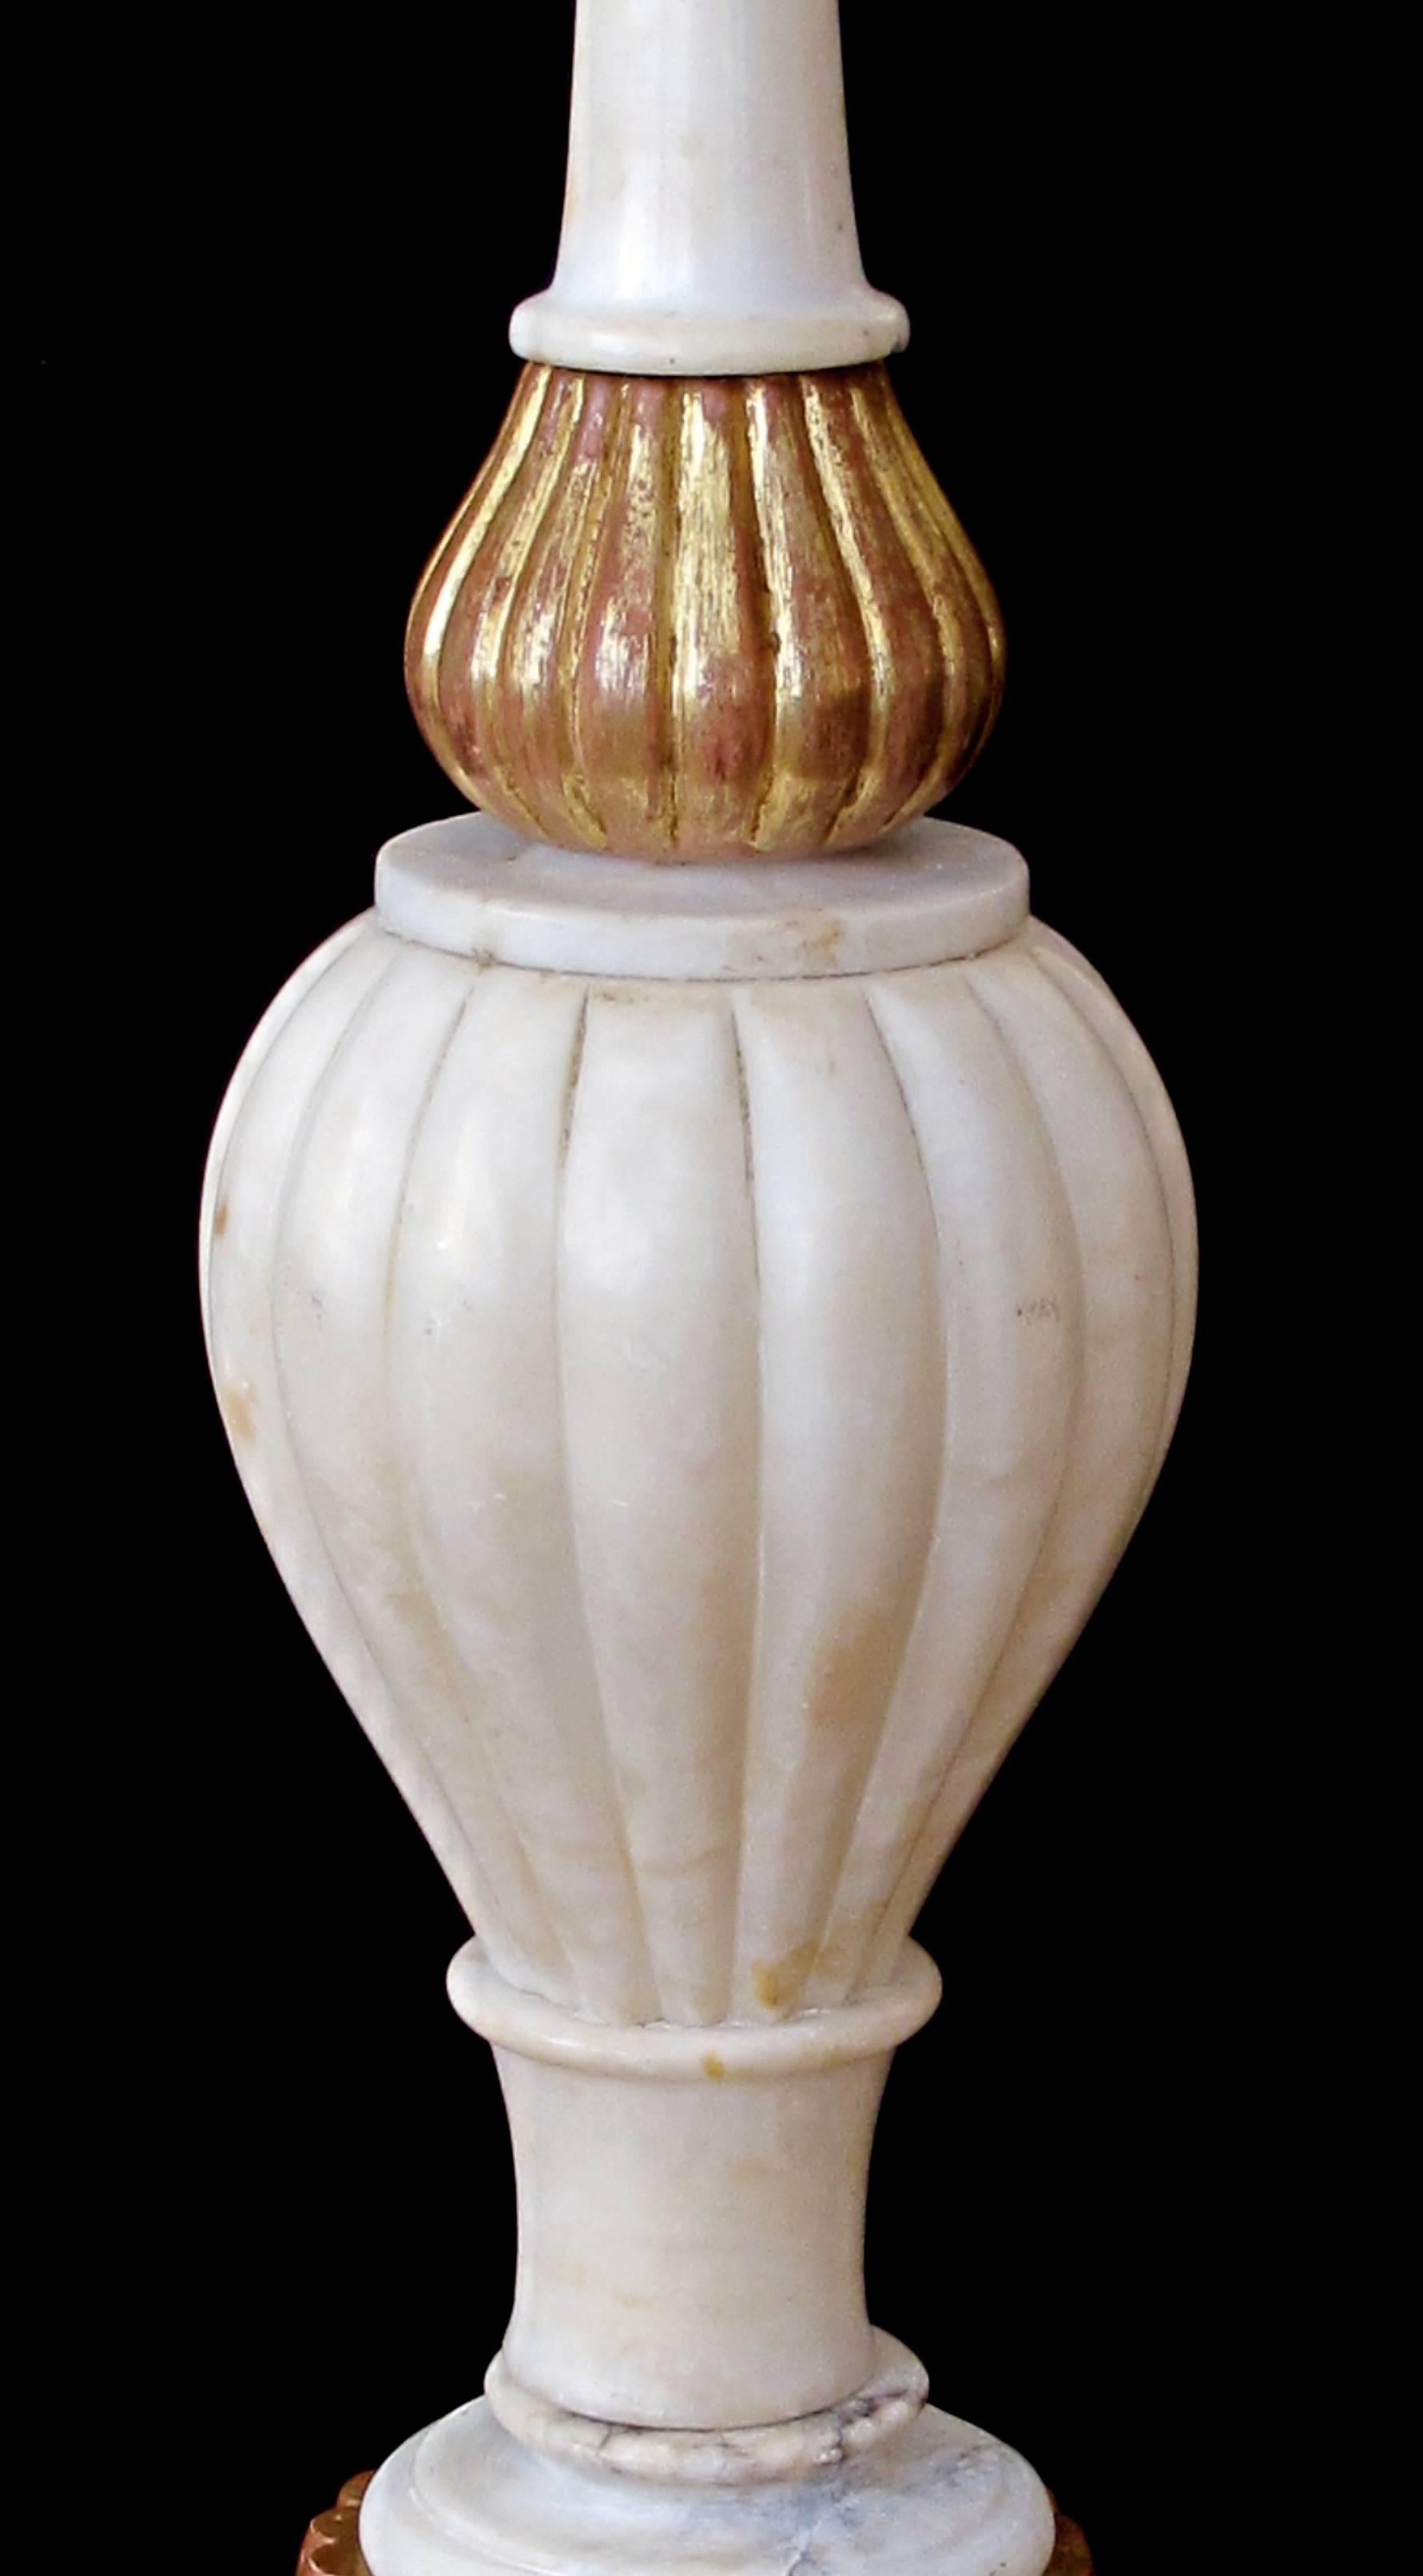 Each tall lamp with long neck above a ribbed bulbous body resting on a flared giltwood base.